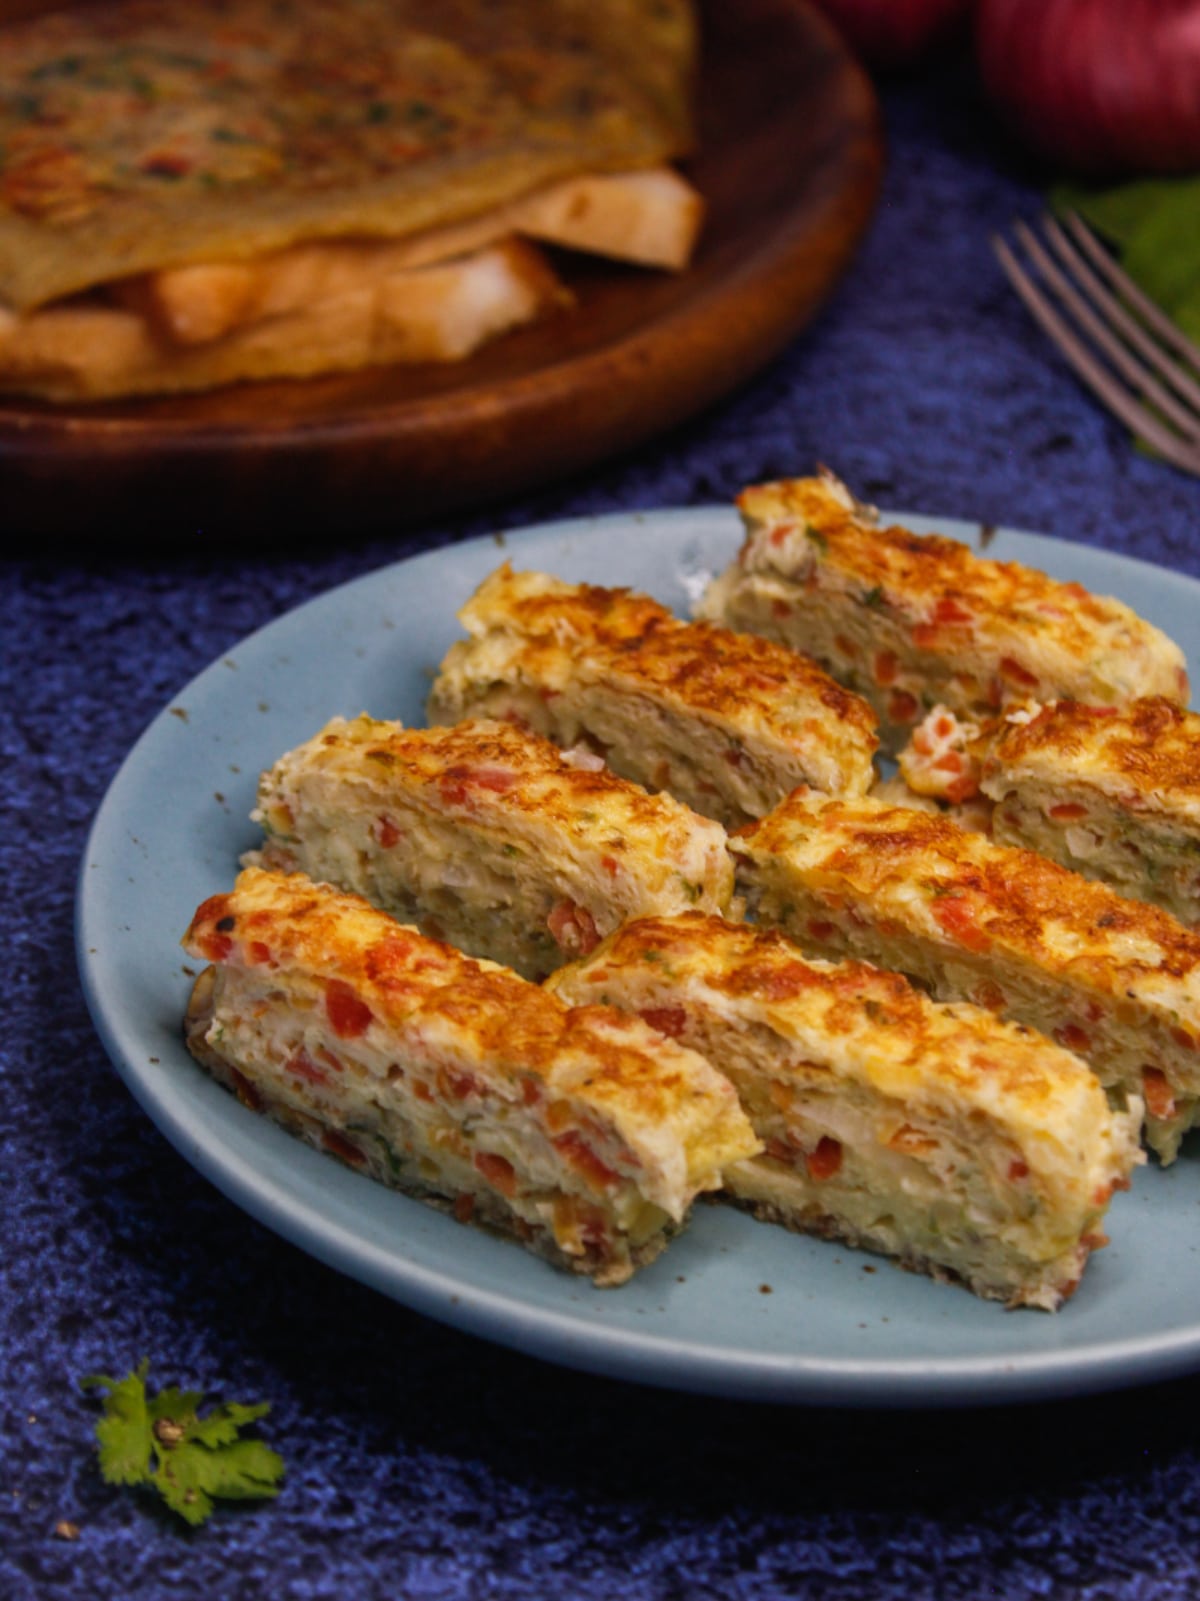 Yummy Cheesy Egg Roll can be enjoyed directly with fork or paratha